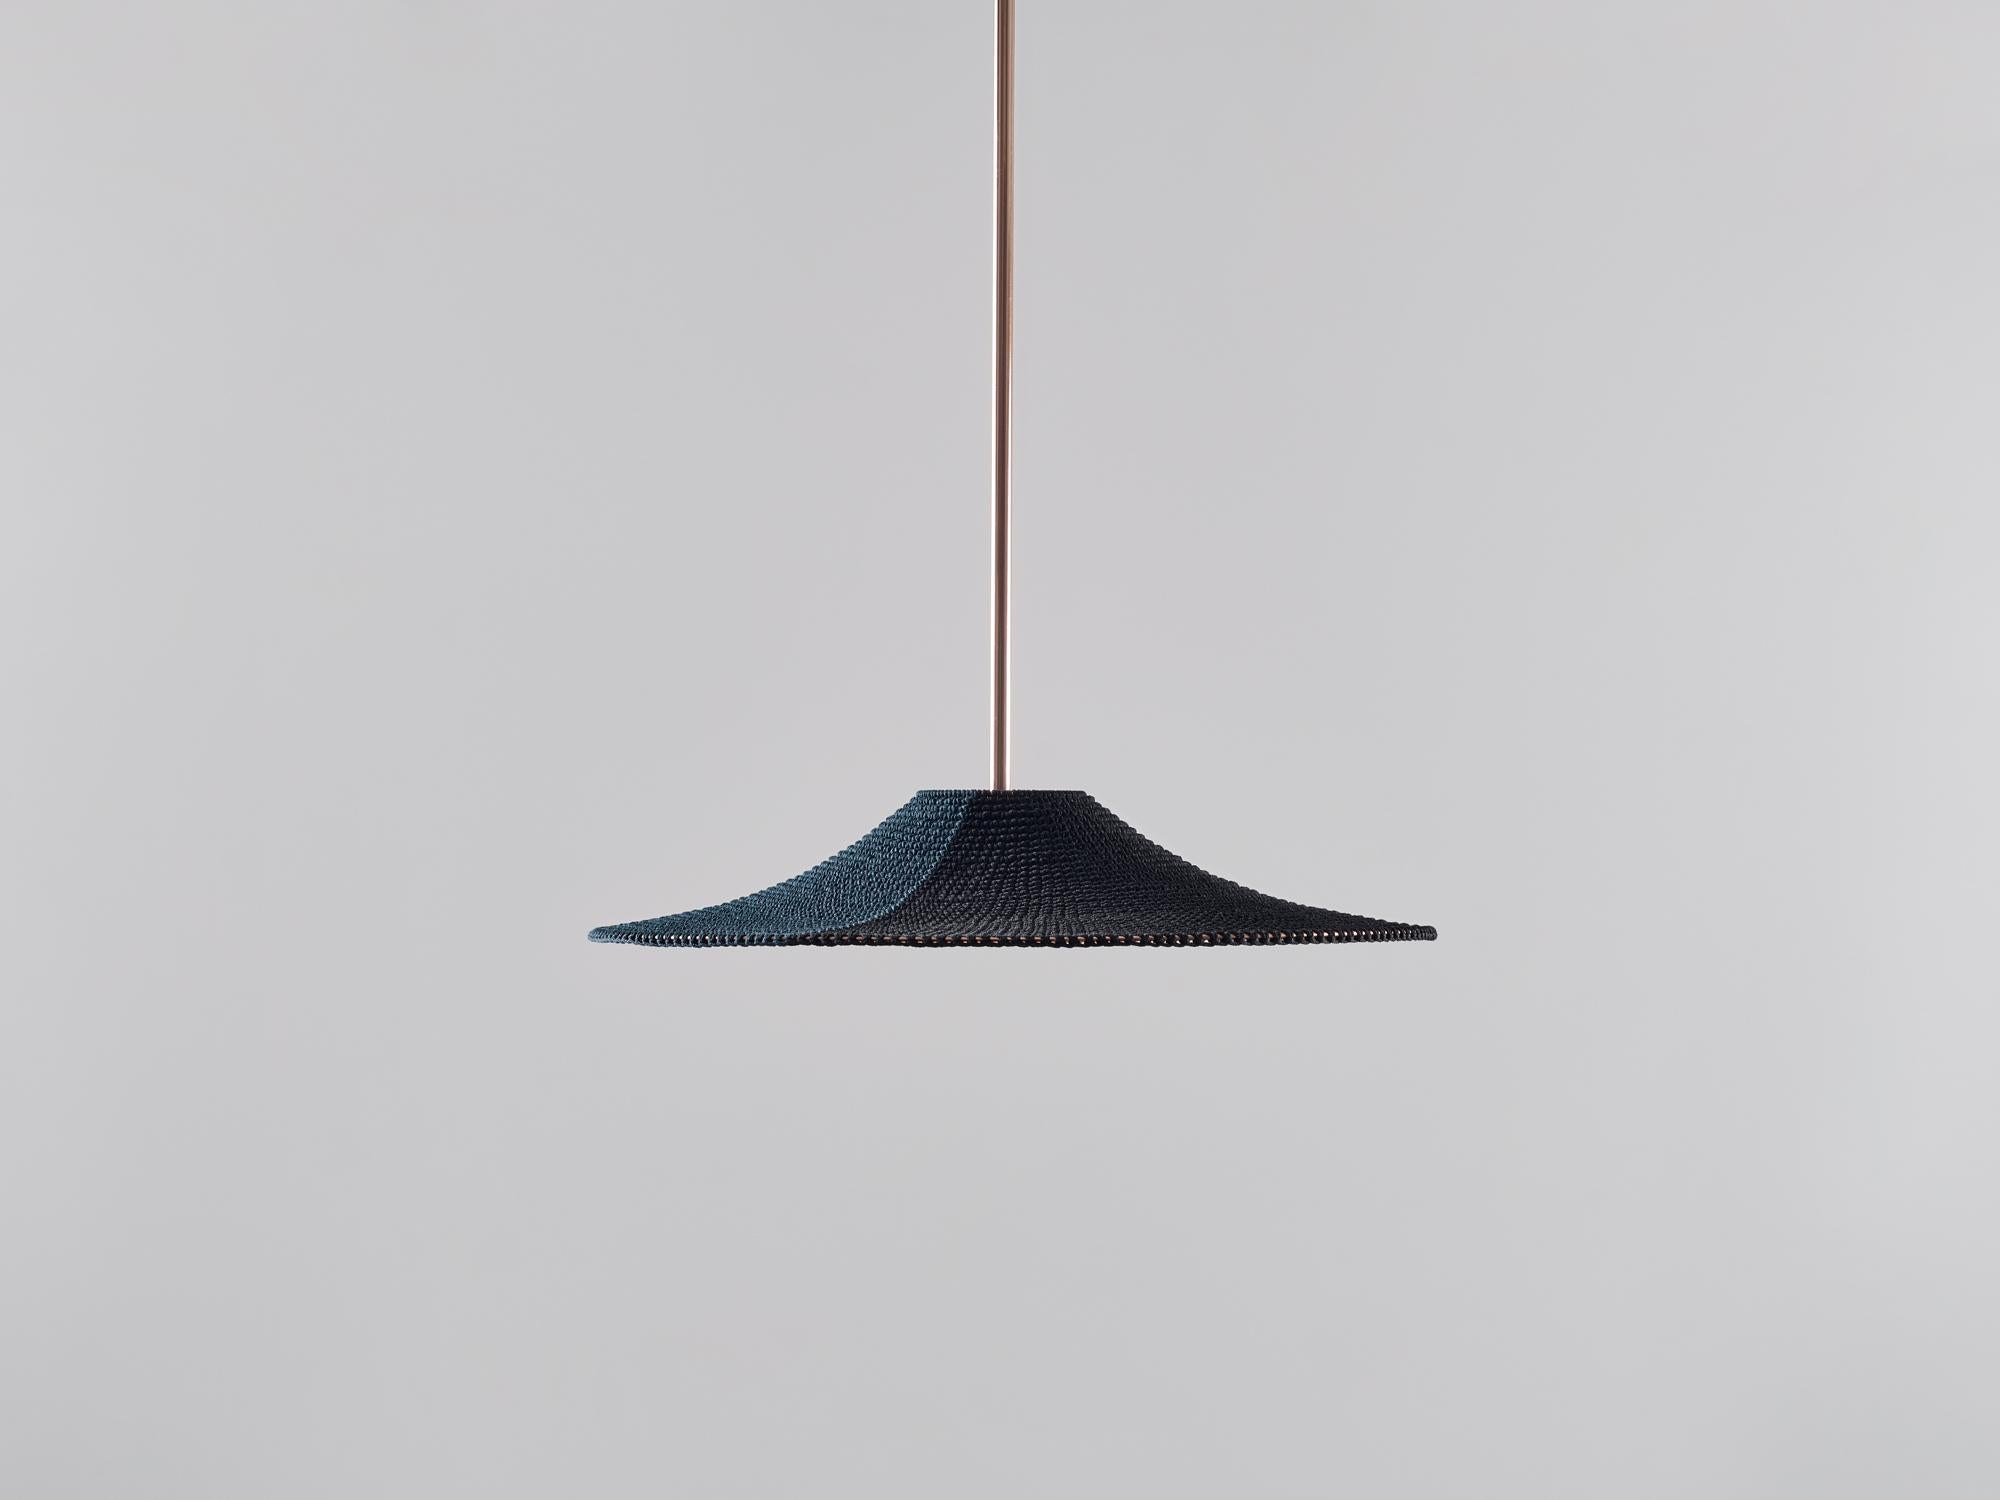 Small simple shade 01 50/50 pendant lamp by Naomi Paul
Dimensions: D 50 x H 8 cm
Materials: Metal frame, Egyptian cotton cord.
Colors: Deepsea and Black.
Available in other colors and in 3 sizes: D 50, D 60, D 80 cm.
Available in plain, 50/50,